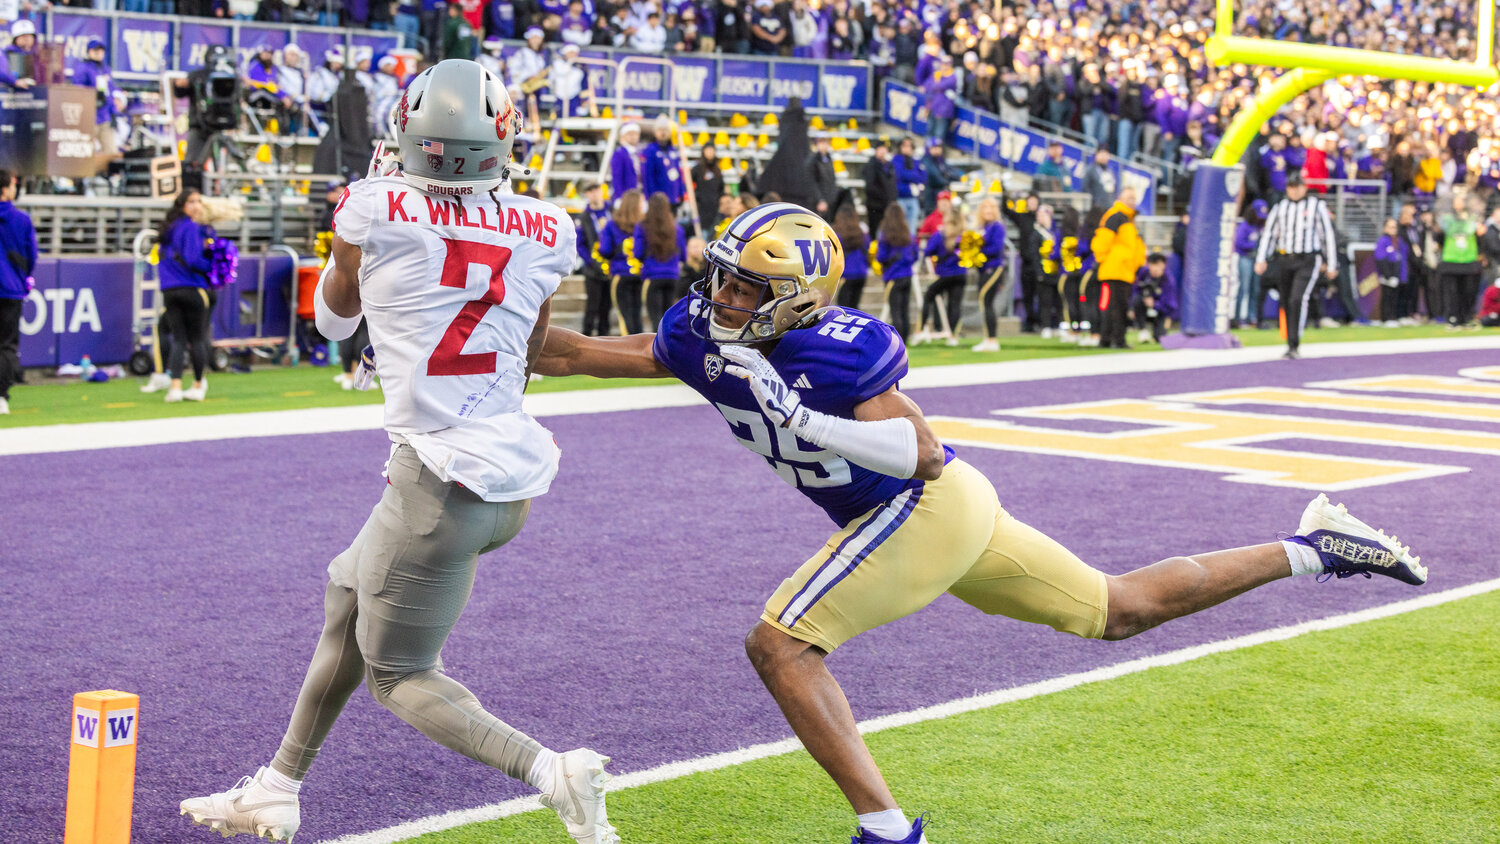 Cougars receiver Kyle Williams (2) makes a catch for a touchdown during the Boeing Apple Cup Series football game in Seattle against the University of Washington Huskies on Saturday, Nov. 25.